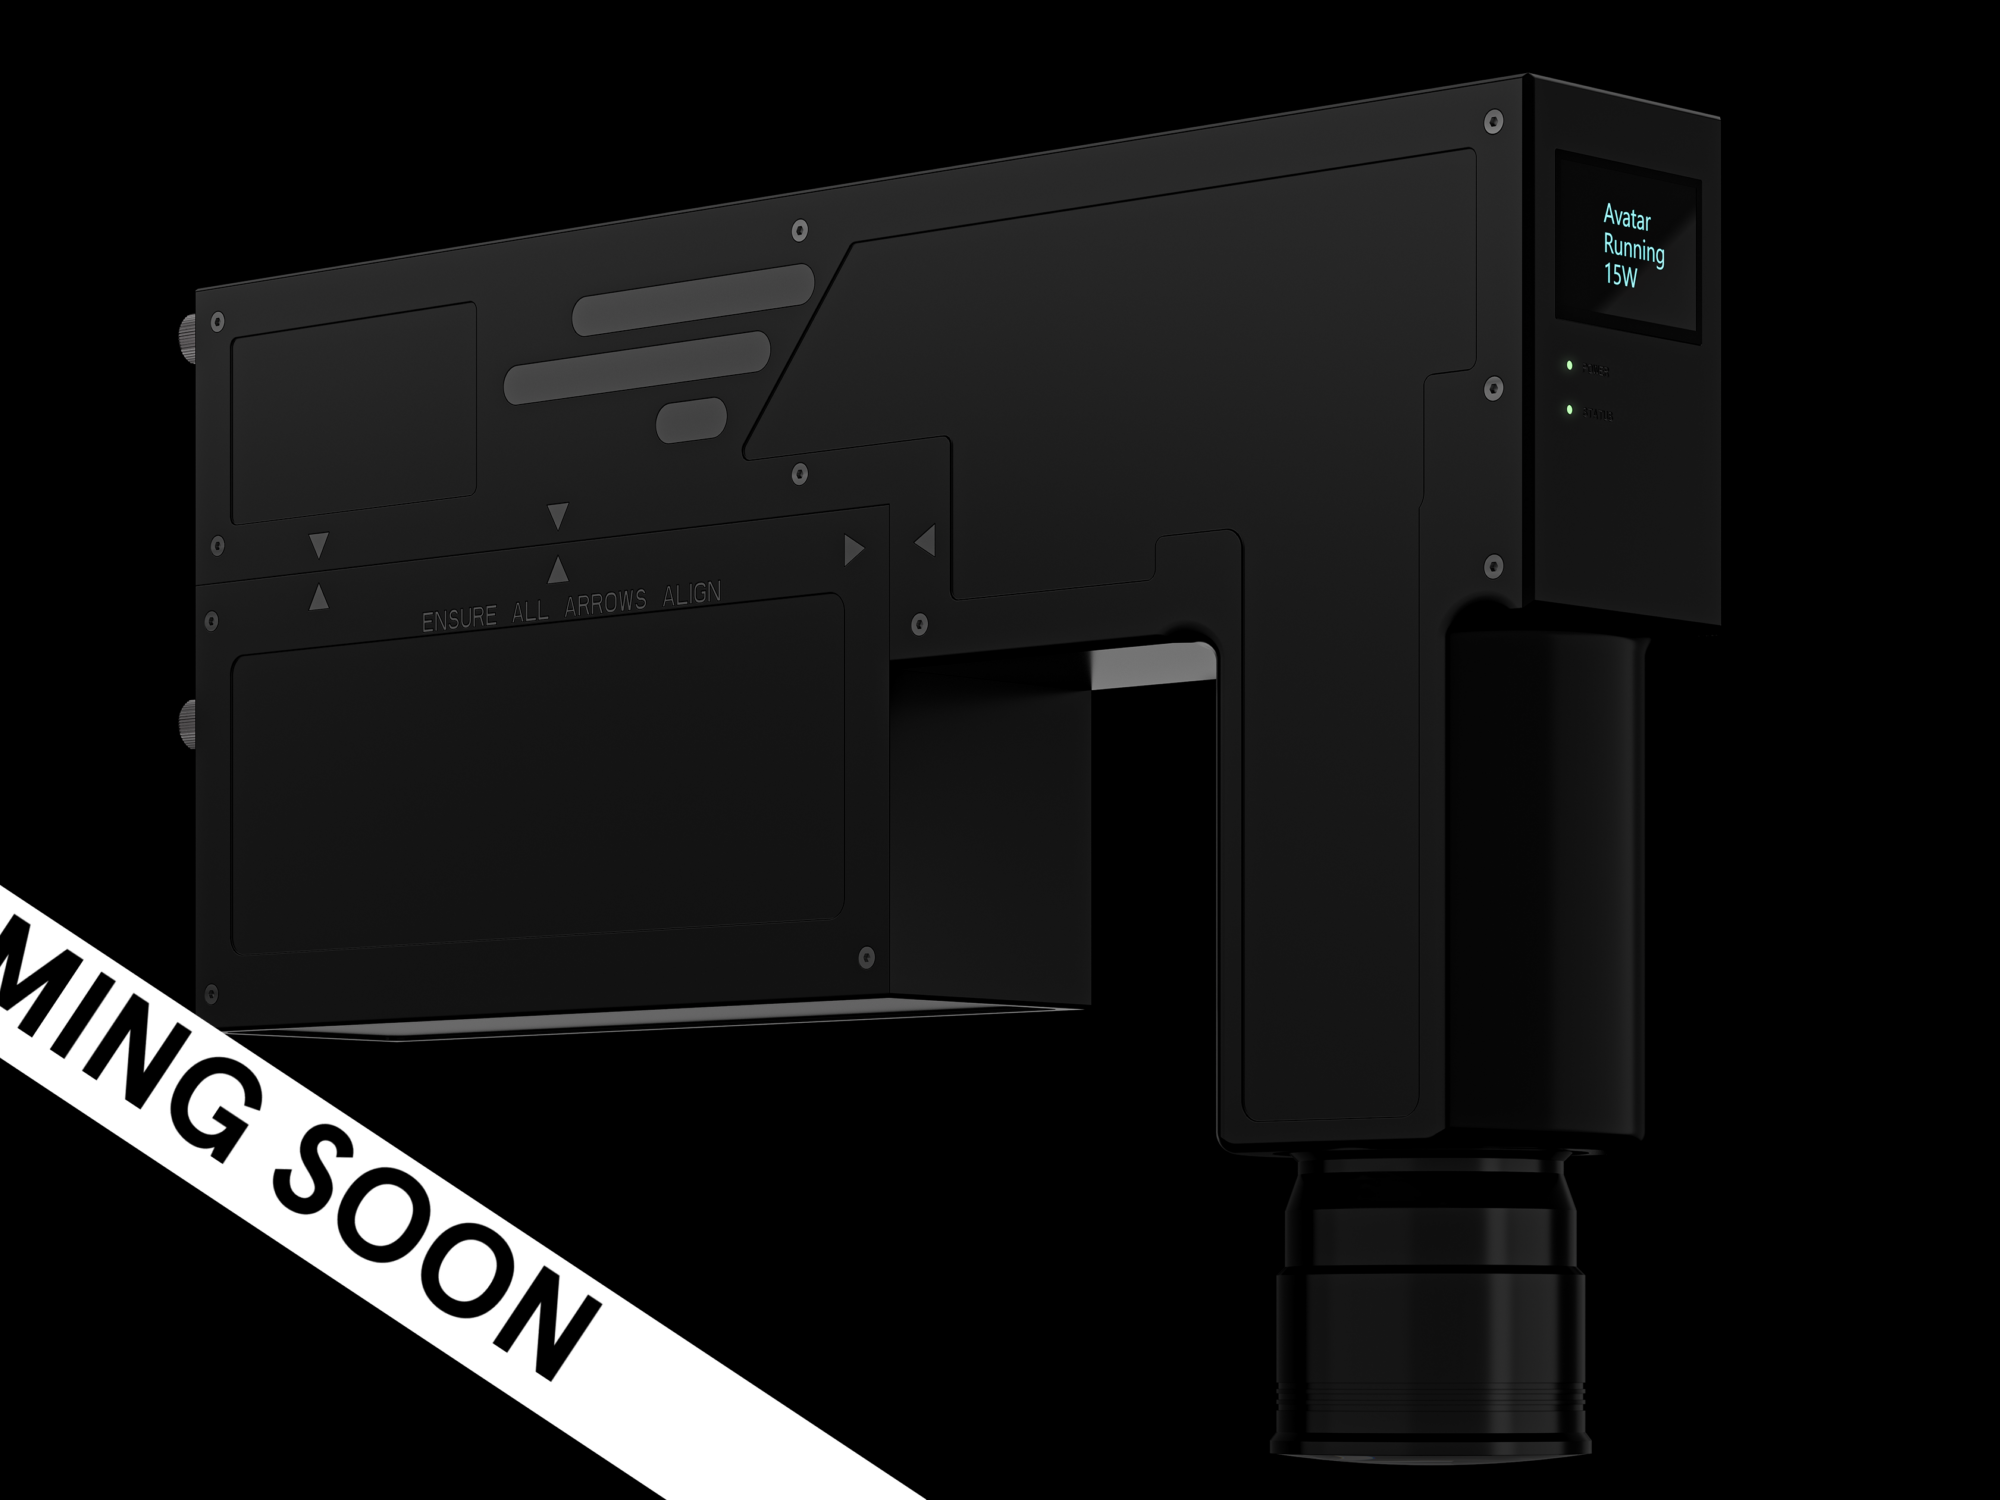 Coming soon: the first native 4K Light Projector